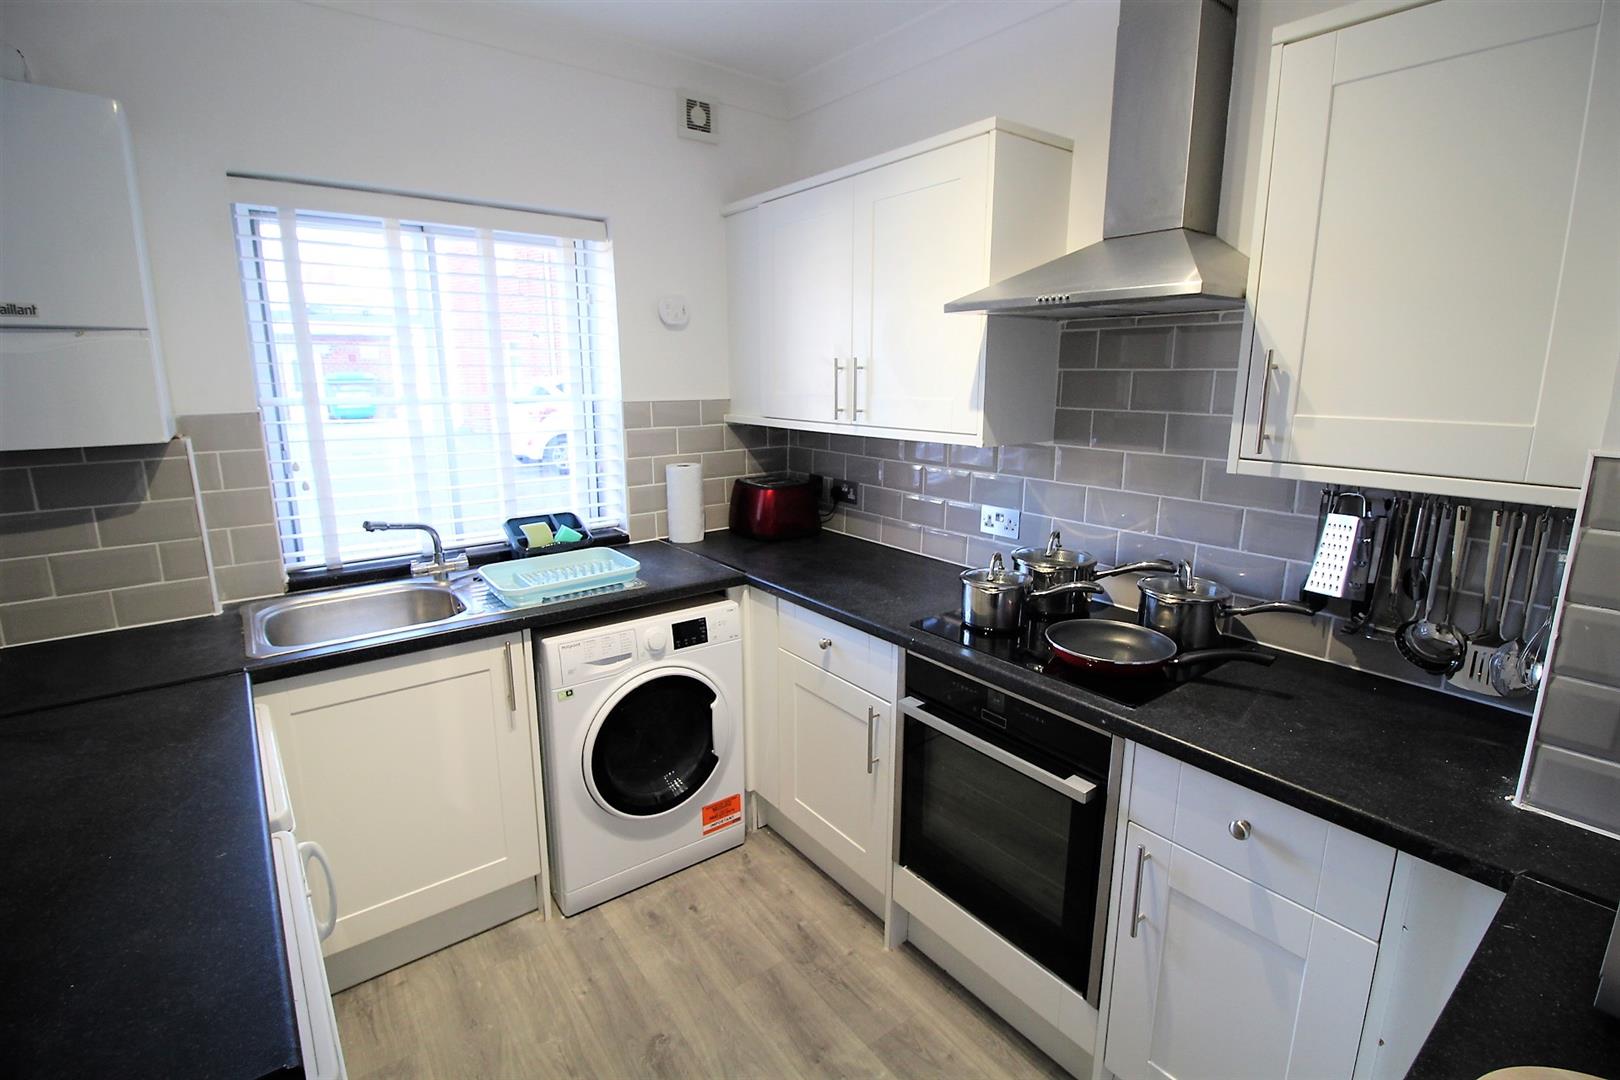 flat for rent palmerston road